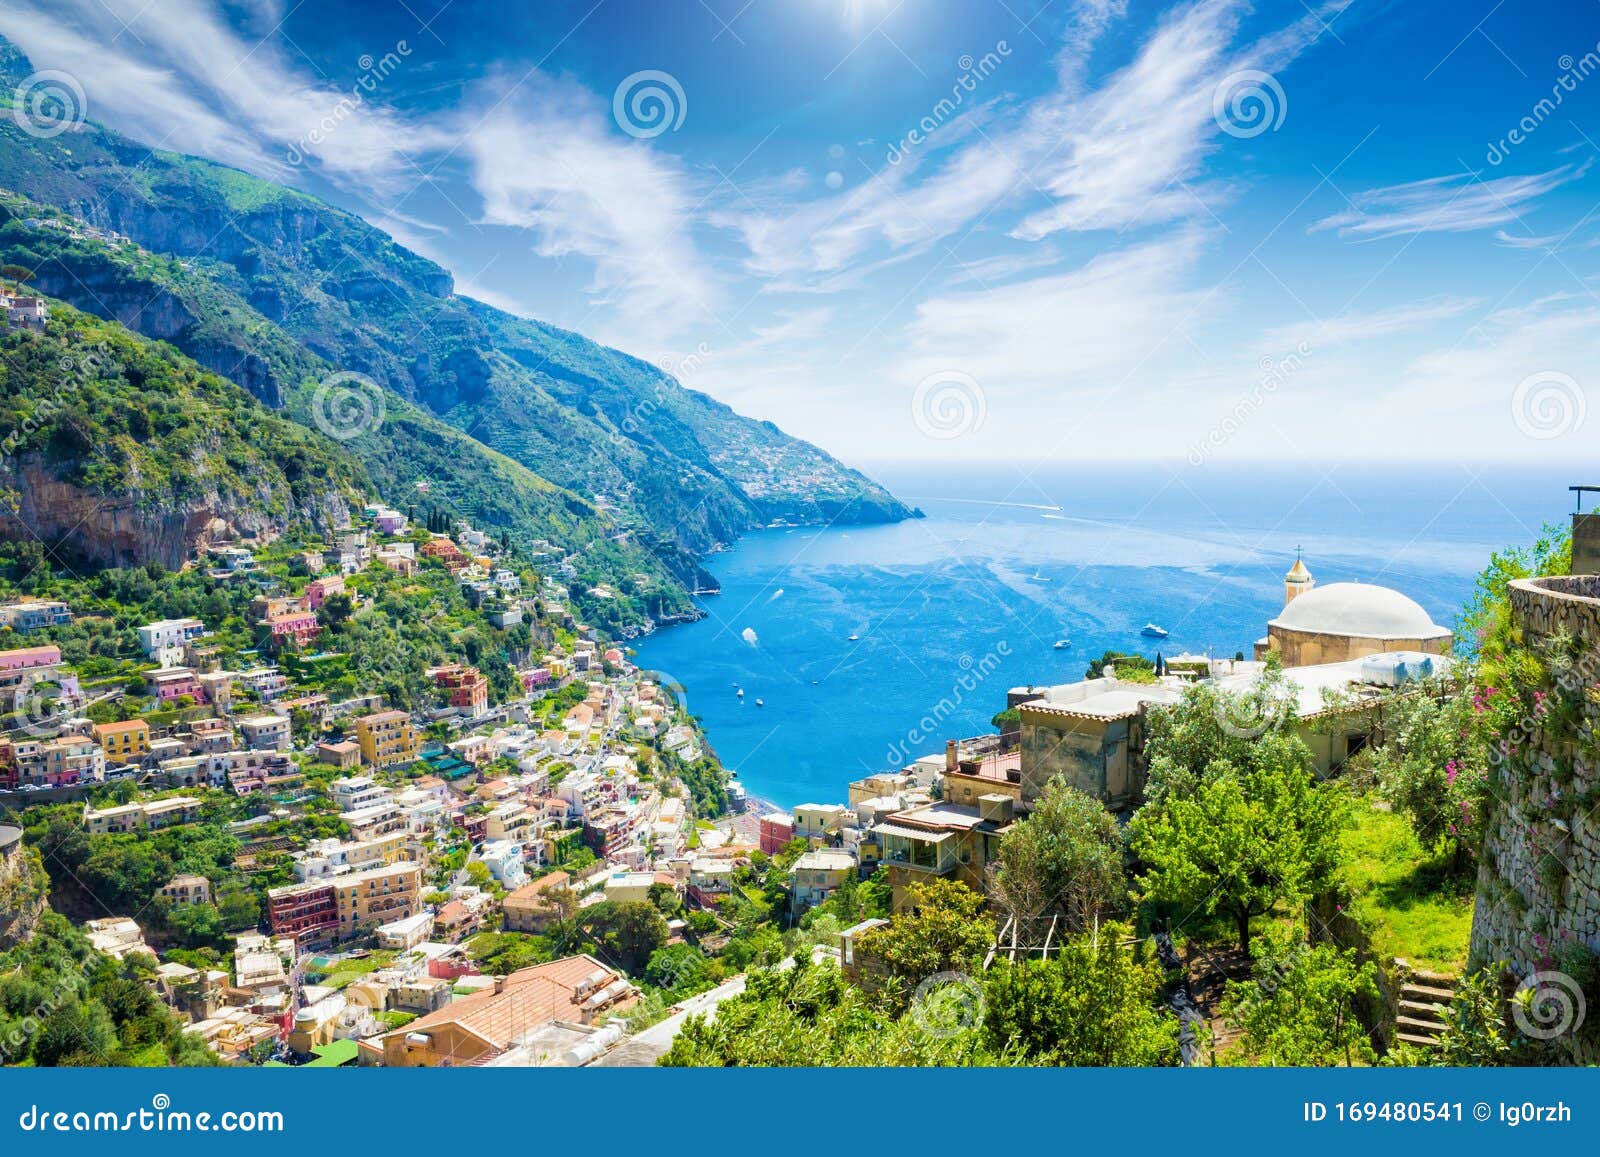 Aerial View of Positano, Picturesque Town with Splendid Coastal Views ...